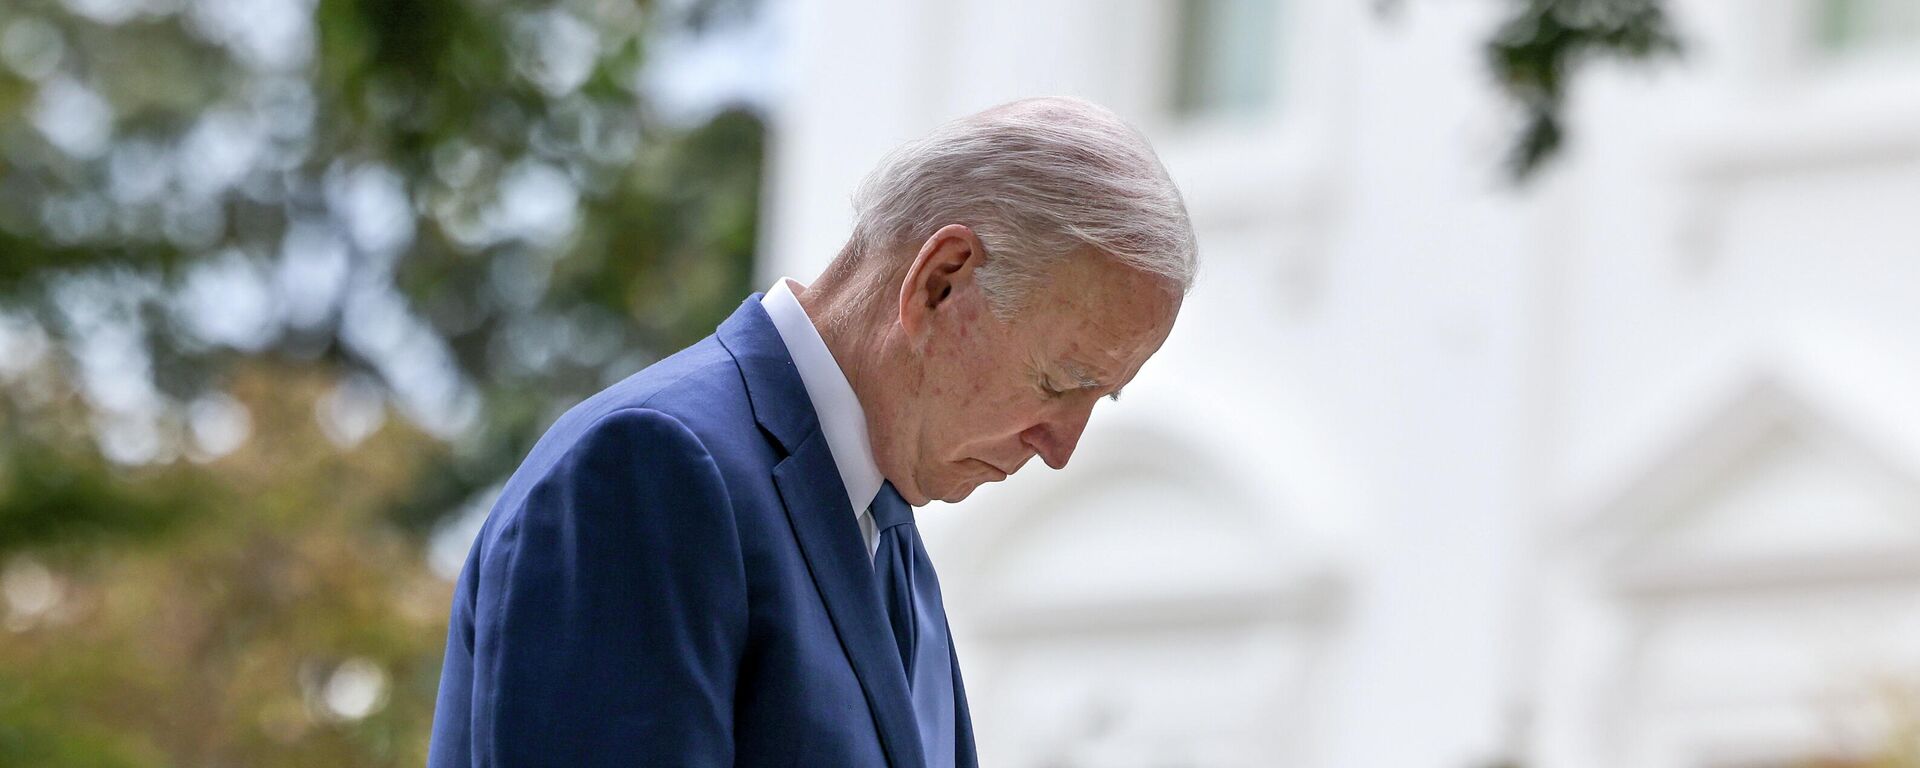 U.S. President Joe Biden lowers his head before he delivers remarks at a proclamation signing to restore protections for Bears Ears and Grand Staircase-Escalante National Monument in Washington, U.S., October 8, 2021. REUTERS/Evelyn Hockstein - Sputnik International, 1920, 31.10.2021